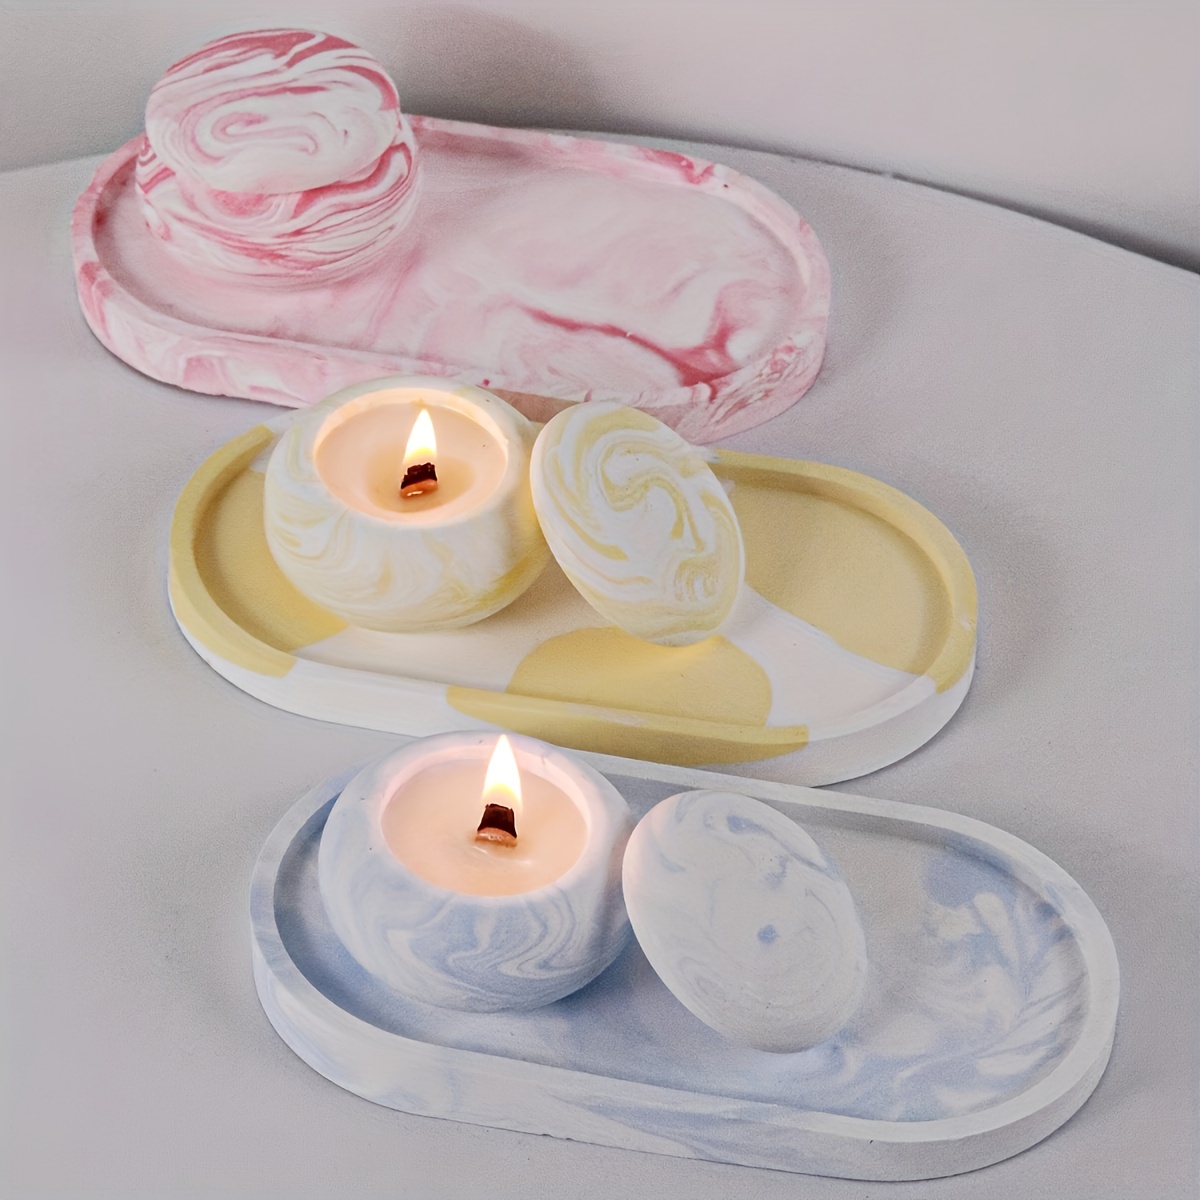 

3pcs/set Diy Resin Oval Tray Silicone Mold And Mini Candle Jar Silicone Mold With Lid, Diy Handmade Resin Candle Holder Making Silicone Mold Clay Gypsum Plaster Ornament